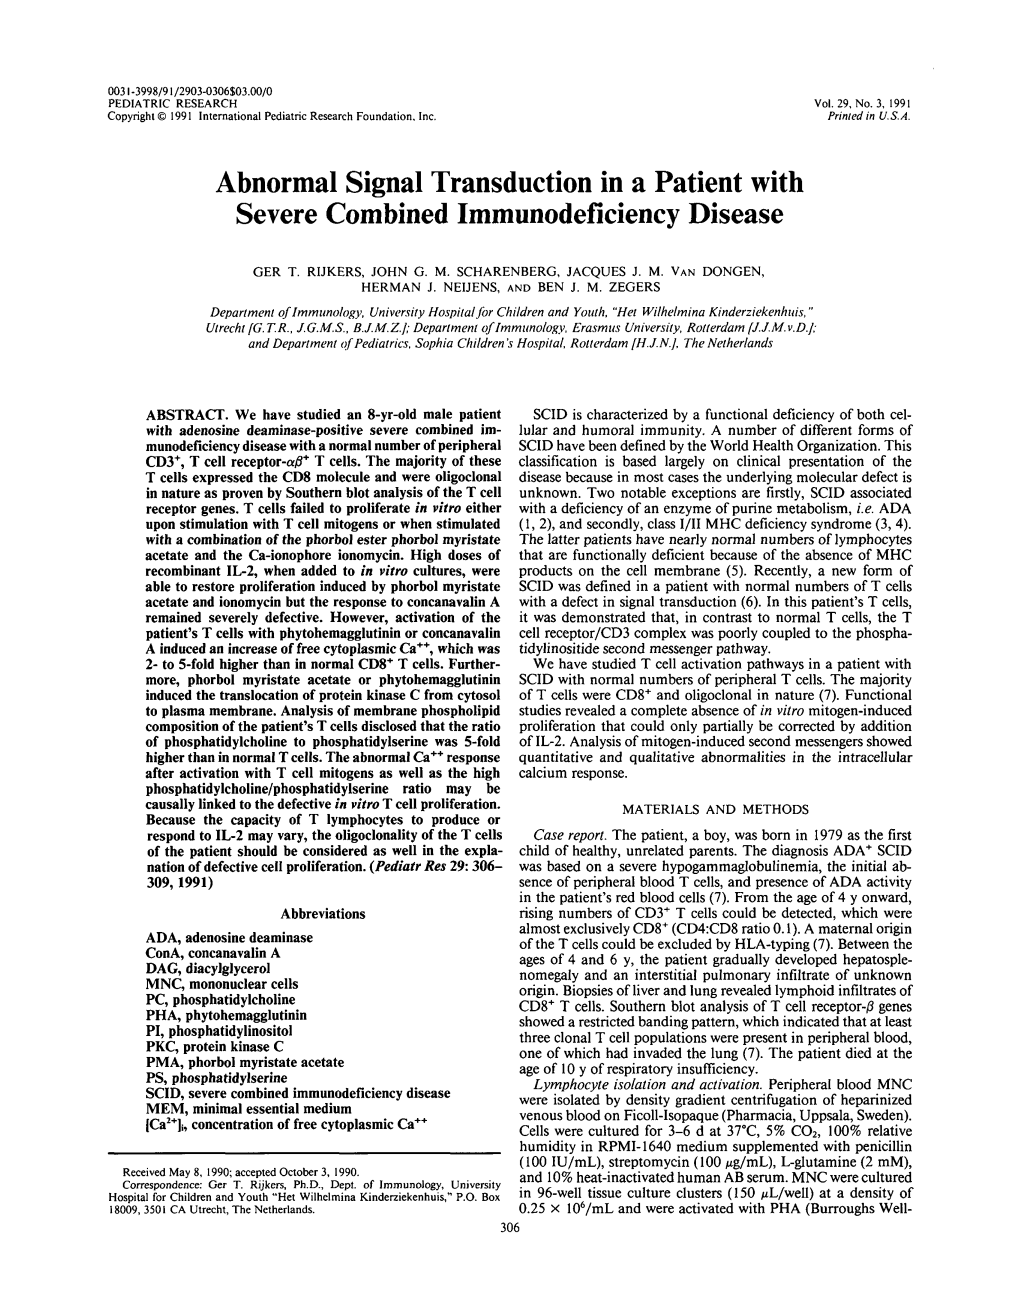 Abnormal Signal Transduction in a Patient with Severe Combined Immunodeficiency Disease